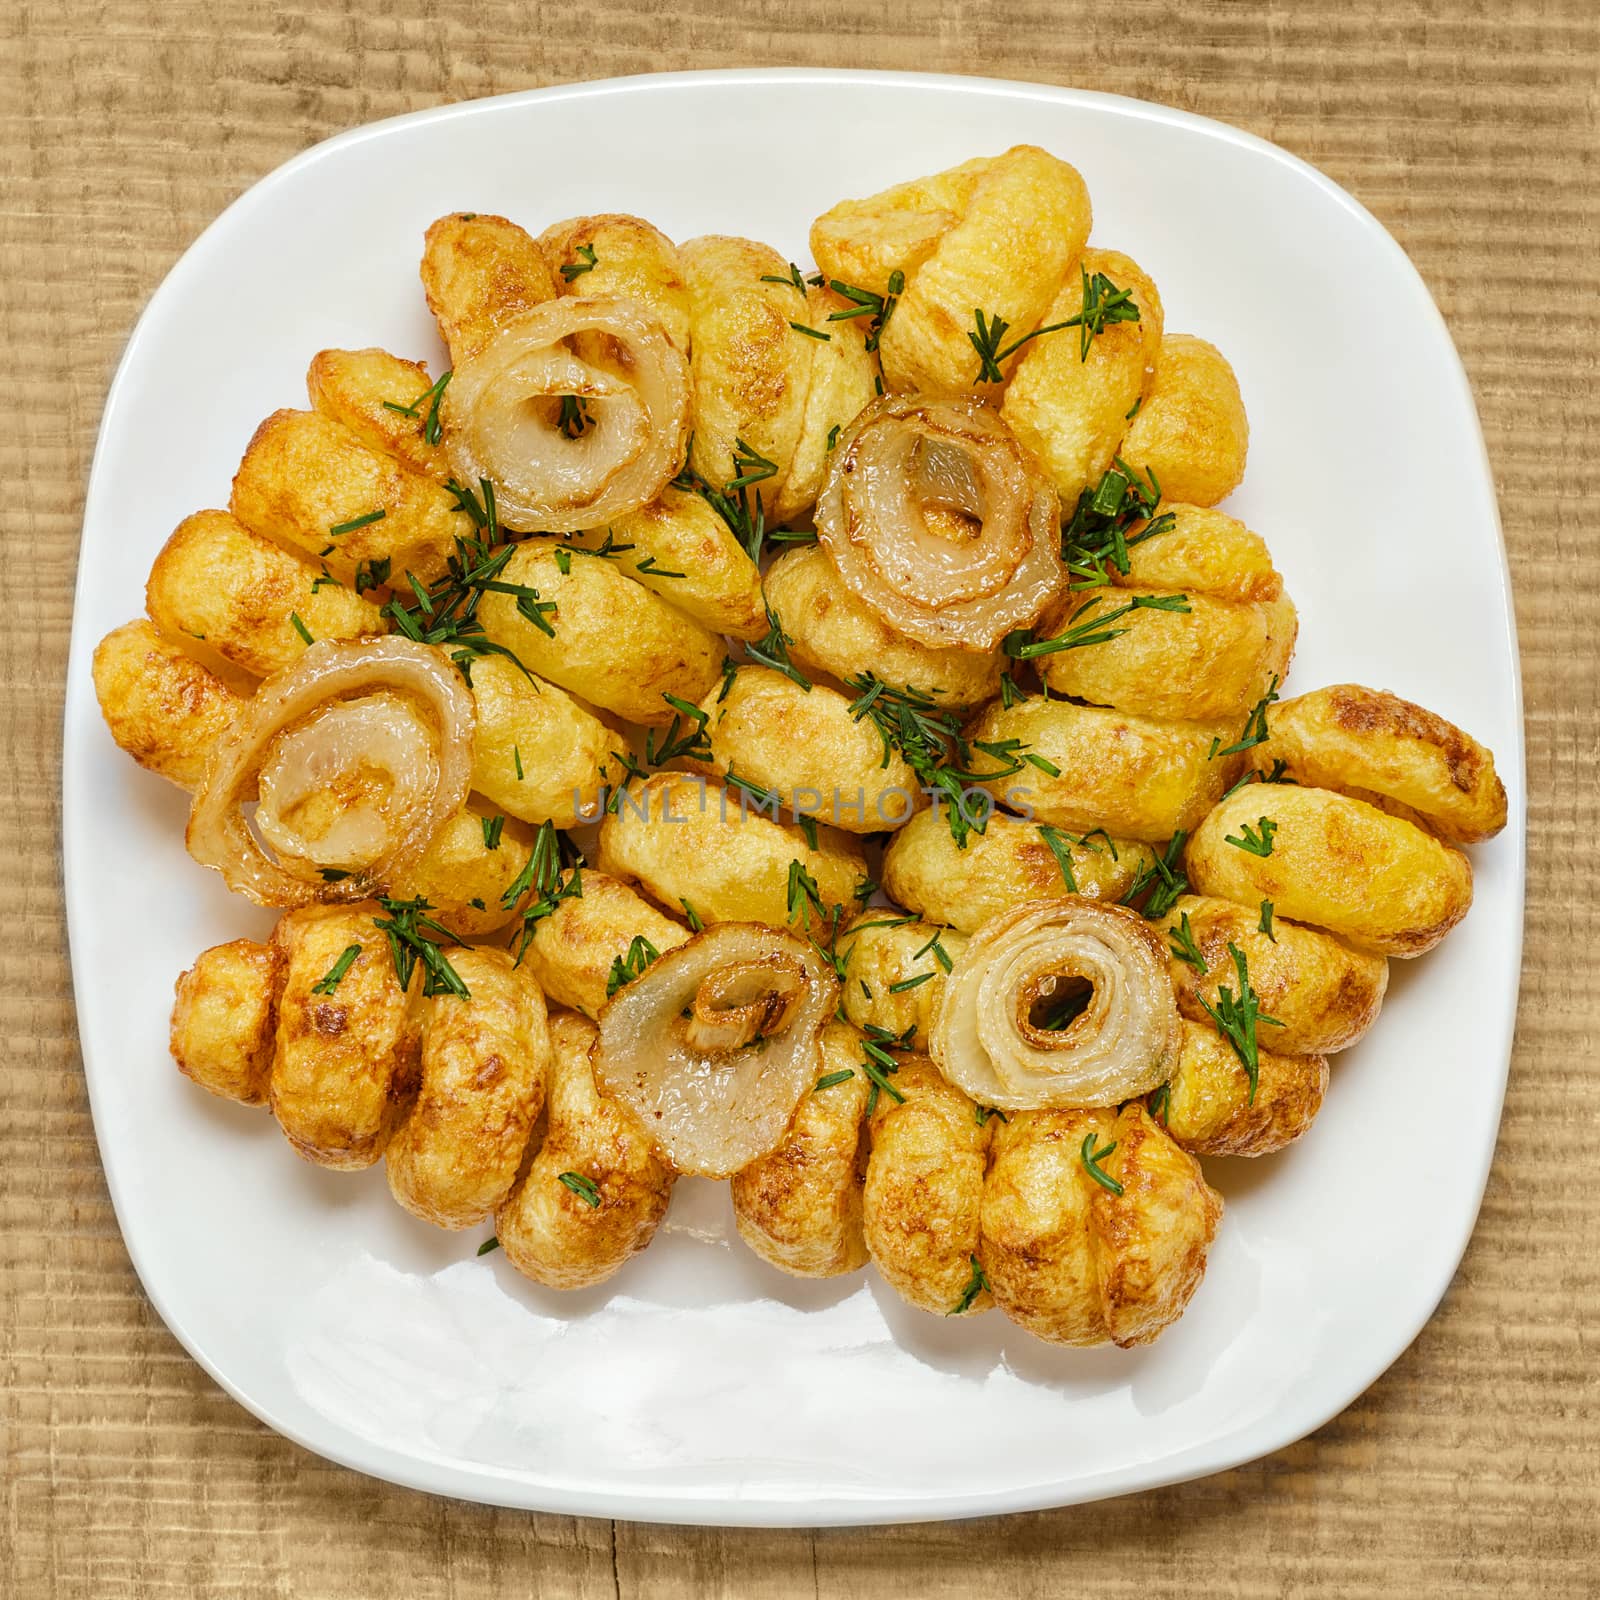 Fried potatoes cut in a spiral, on a white plate and wooden background